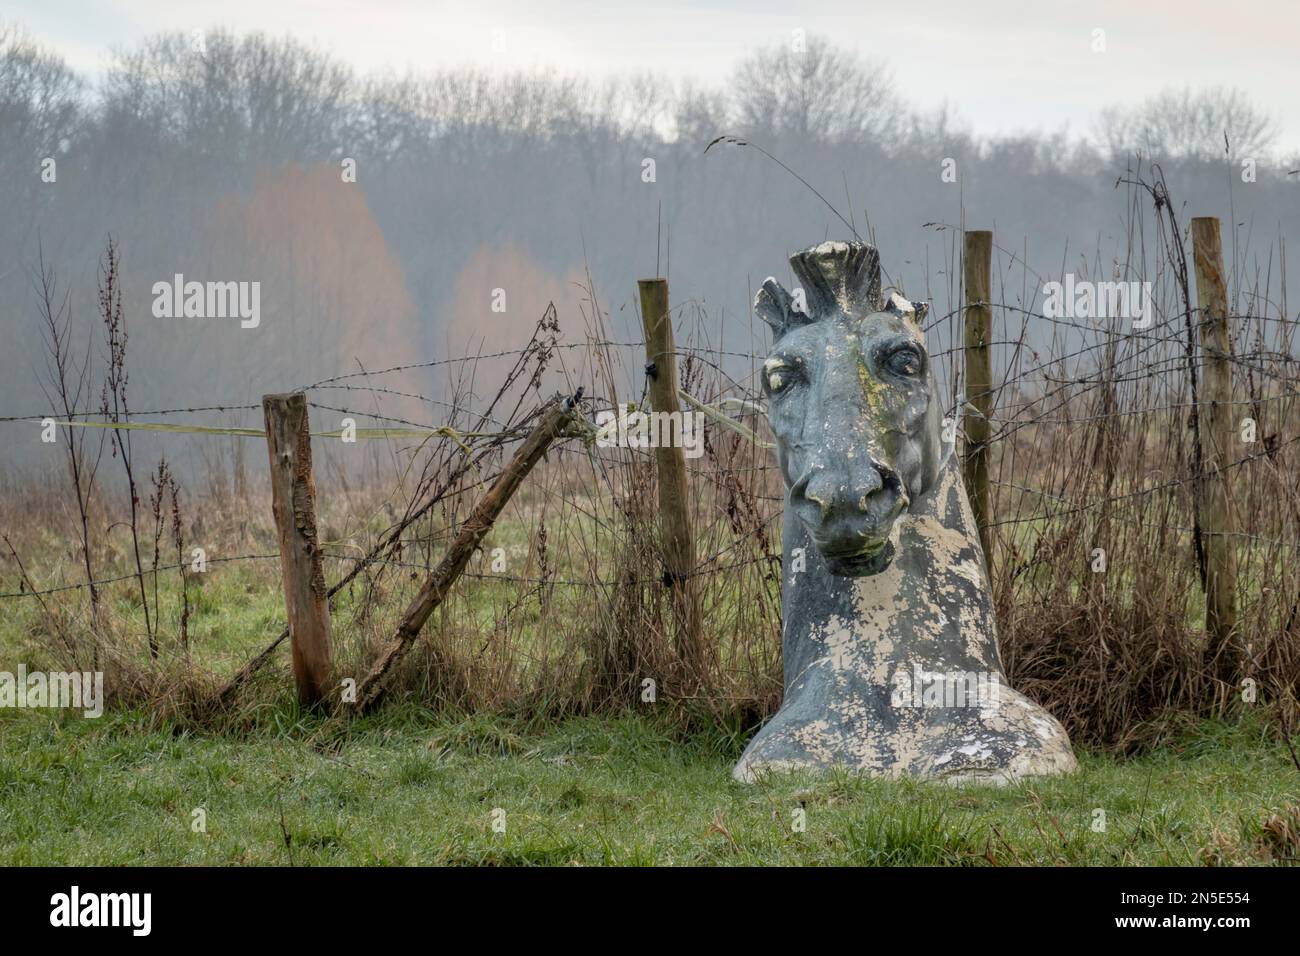 Peeling model of horse's head against barbed wire fence, Bucklebury Common, Berkshire, England, United Kingdom, Europe Stock Photo